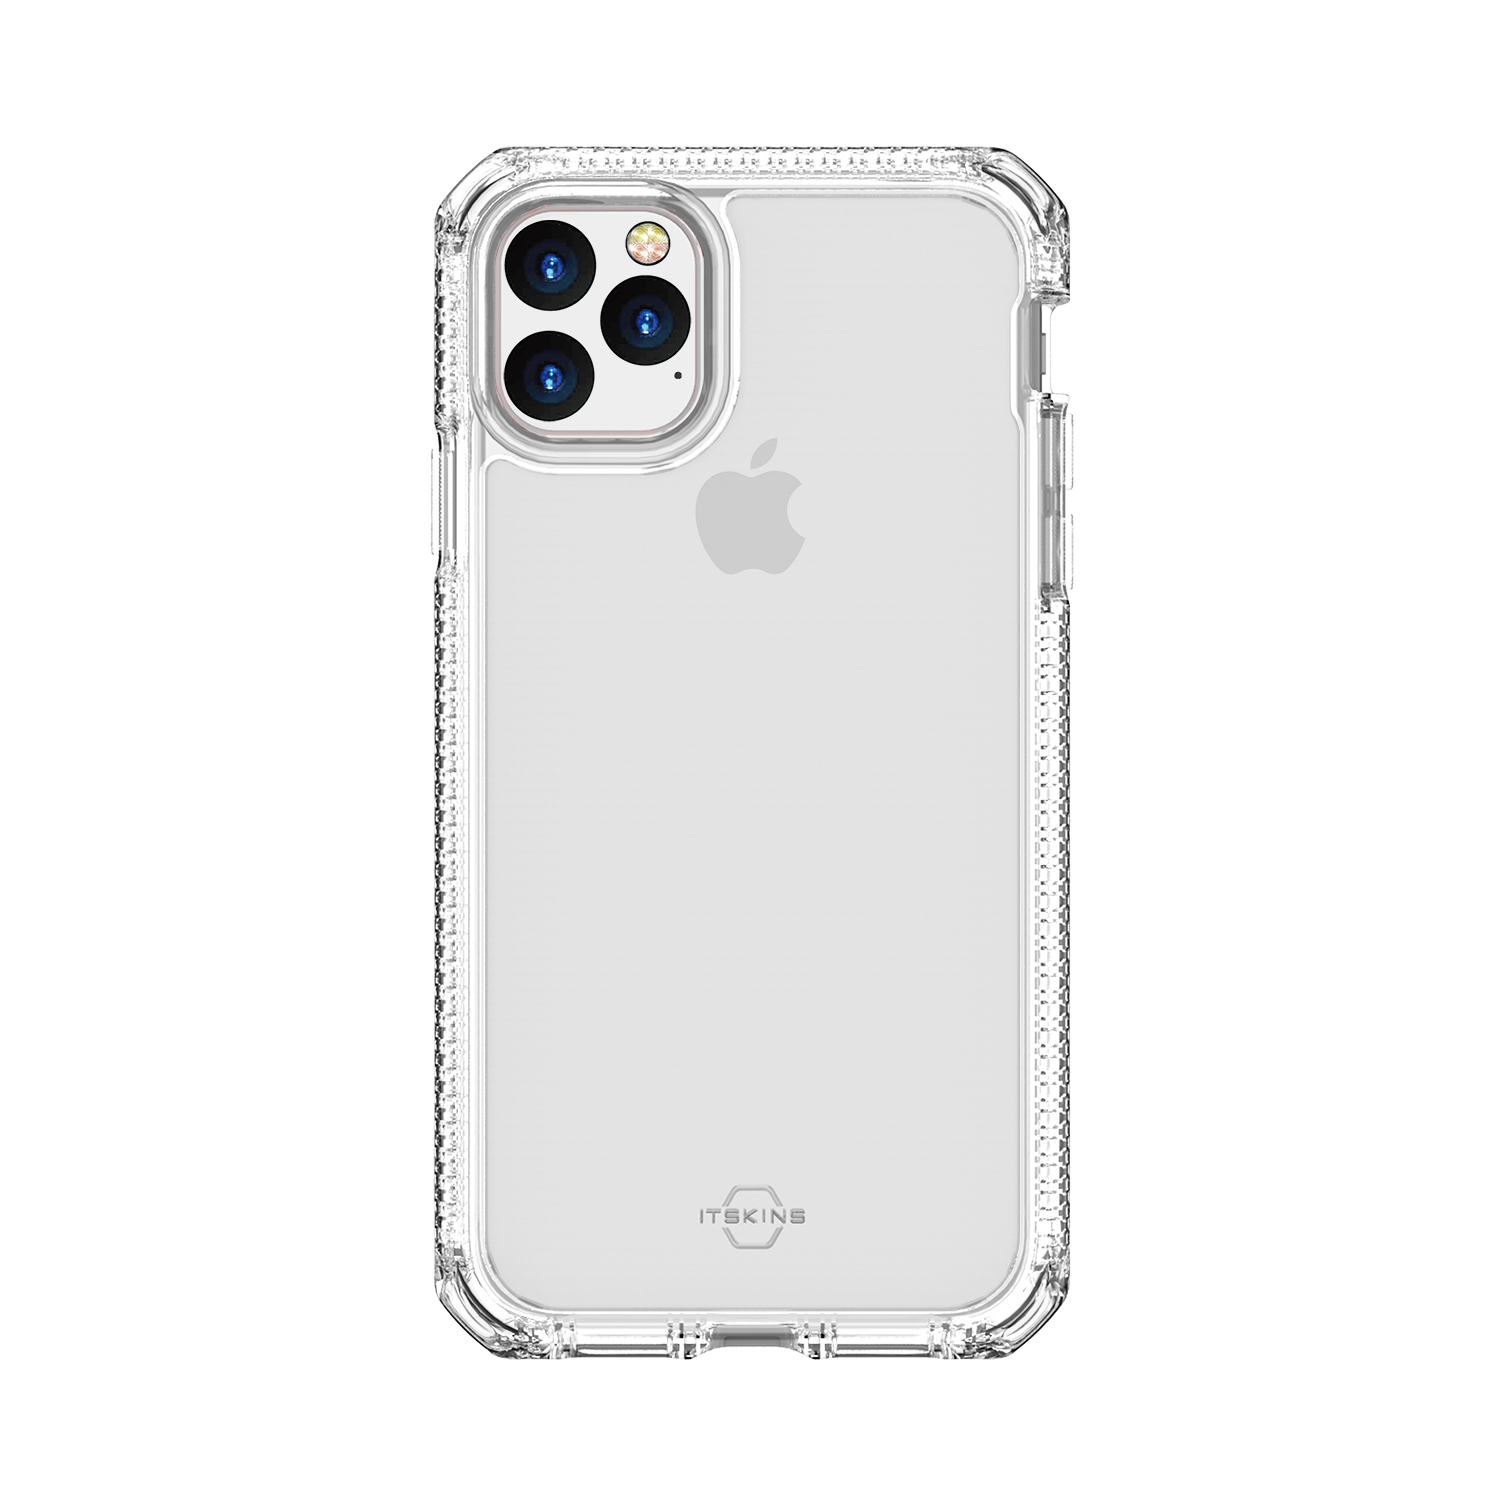 ITSKINS Supreme Clear Case for iPhone 11, 11 Pro & 11 Pro Max